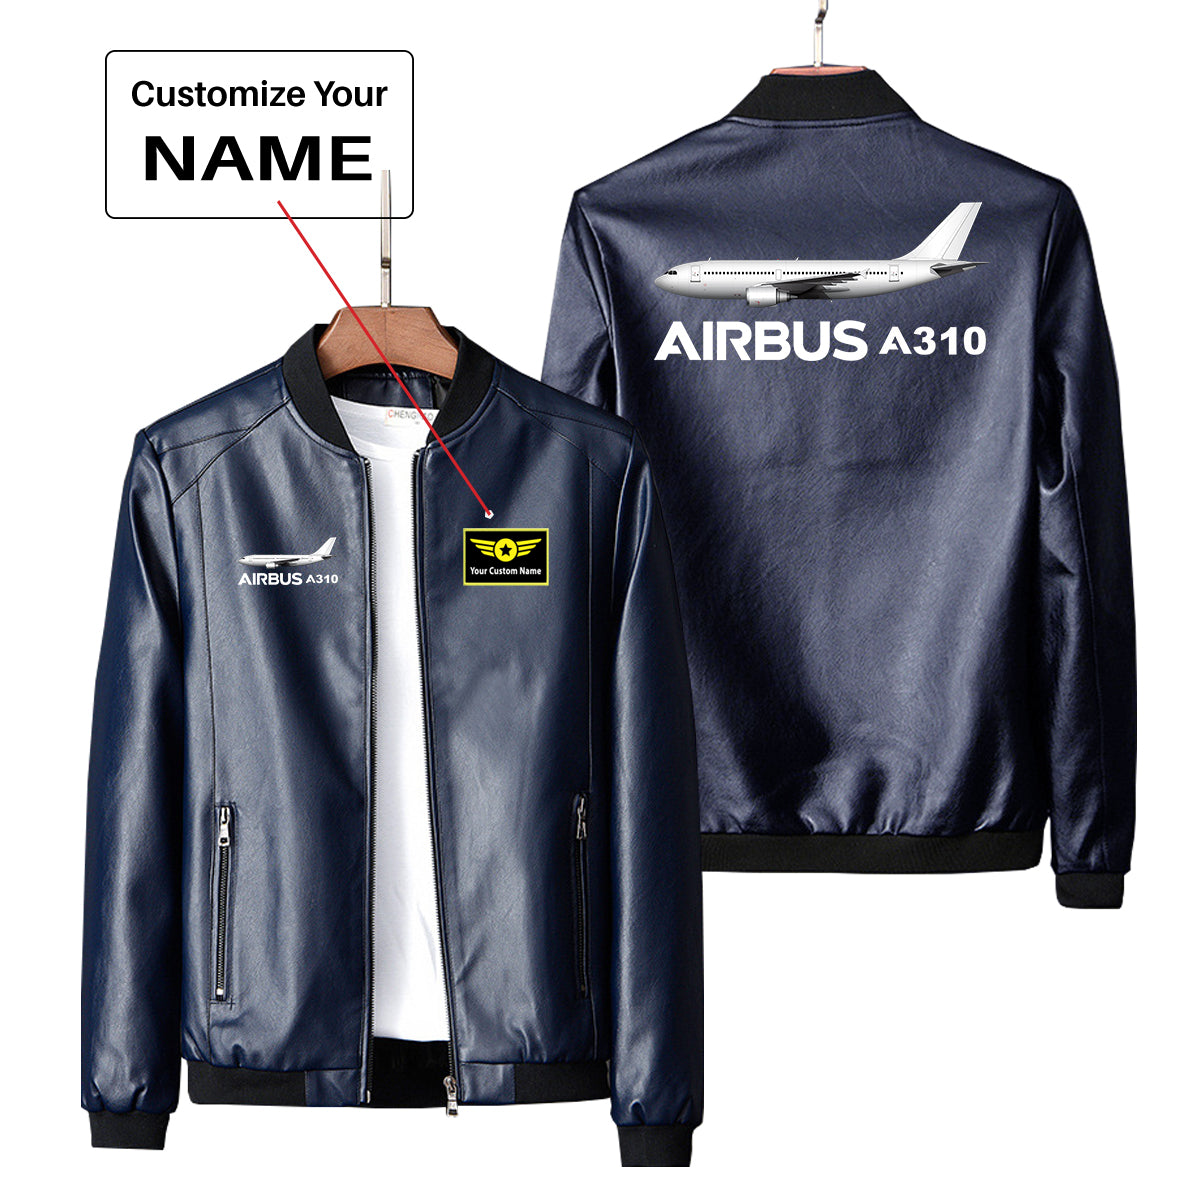 The Airbus A310 Designed PU Leather Jackets